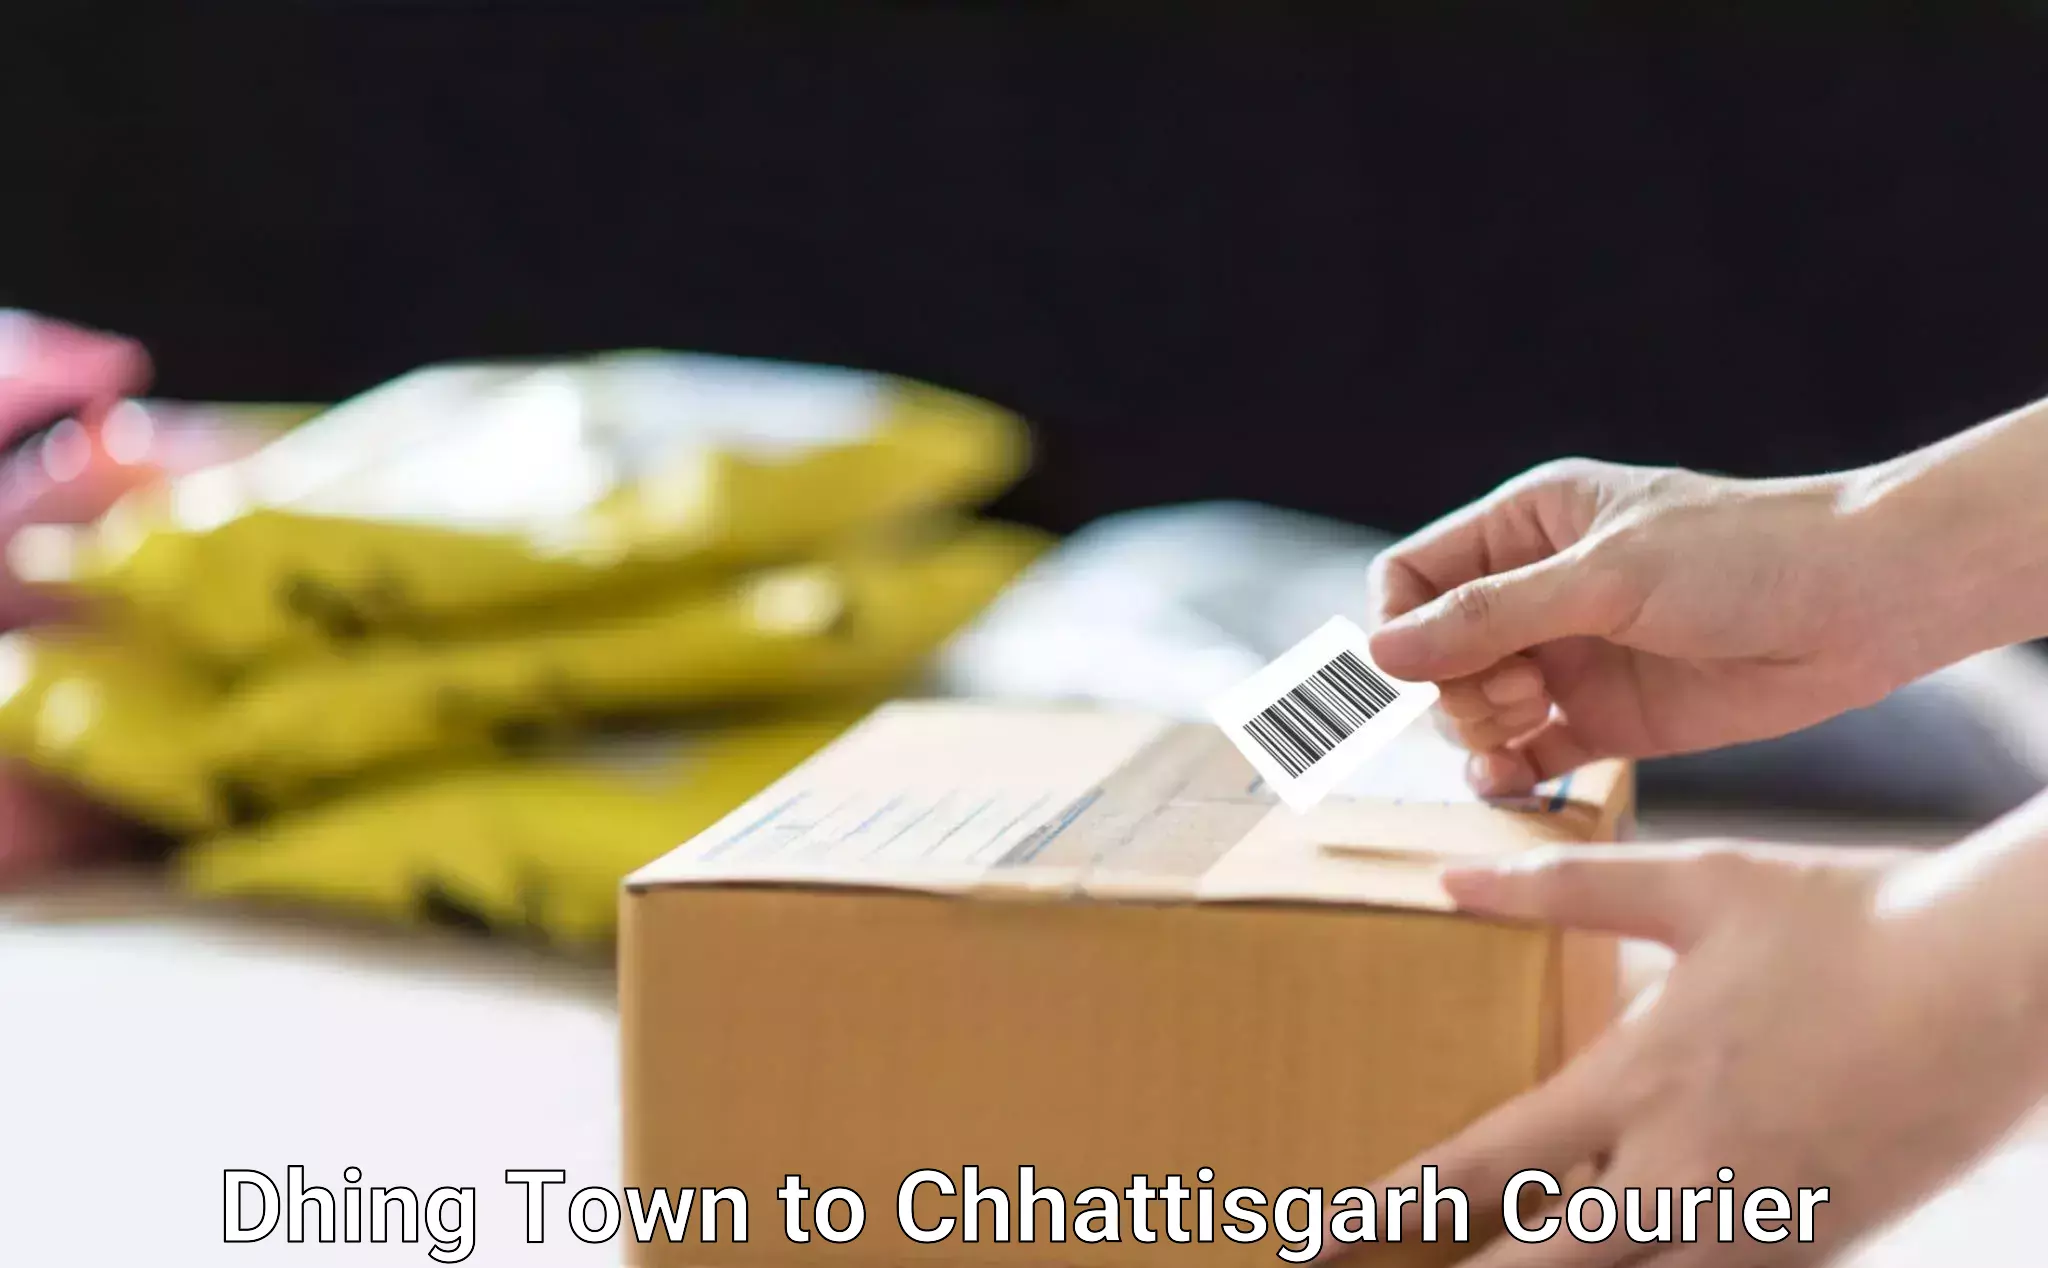 Expedited parcel delivery in Dhing Town to Chhattisgarh